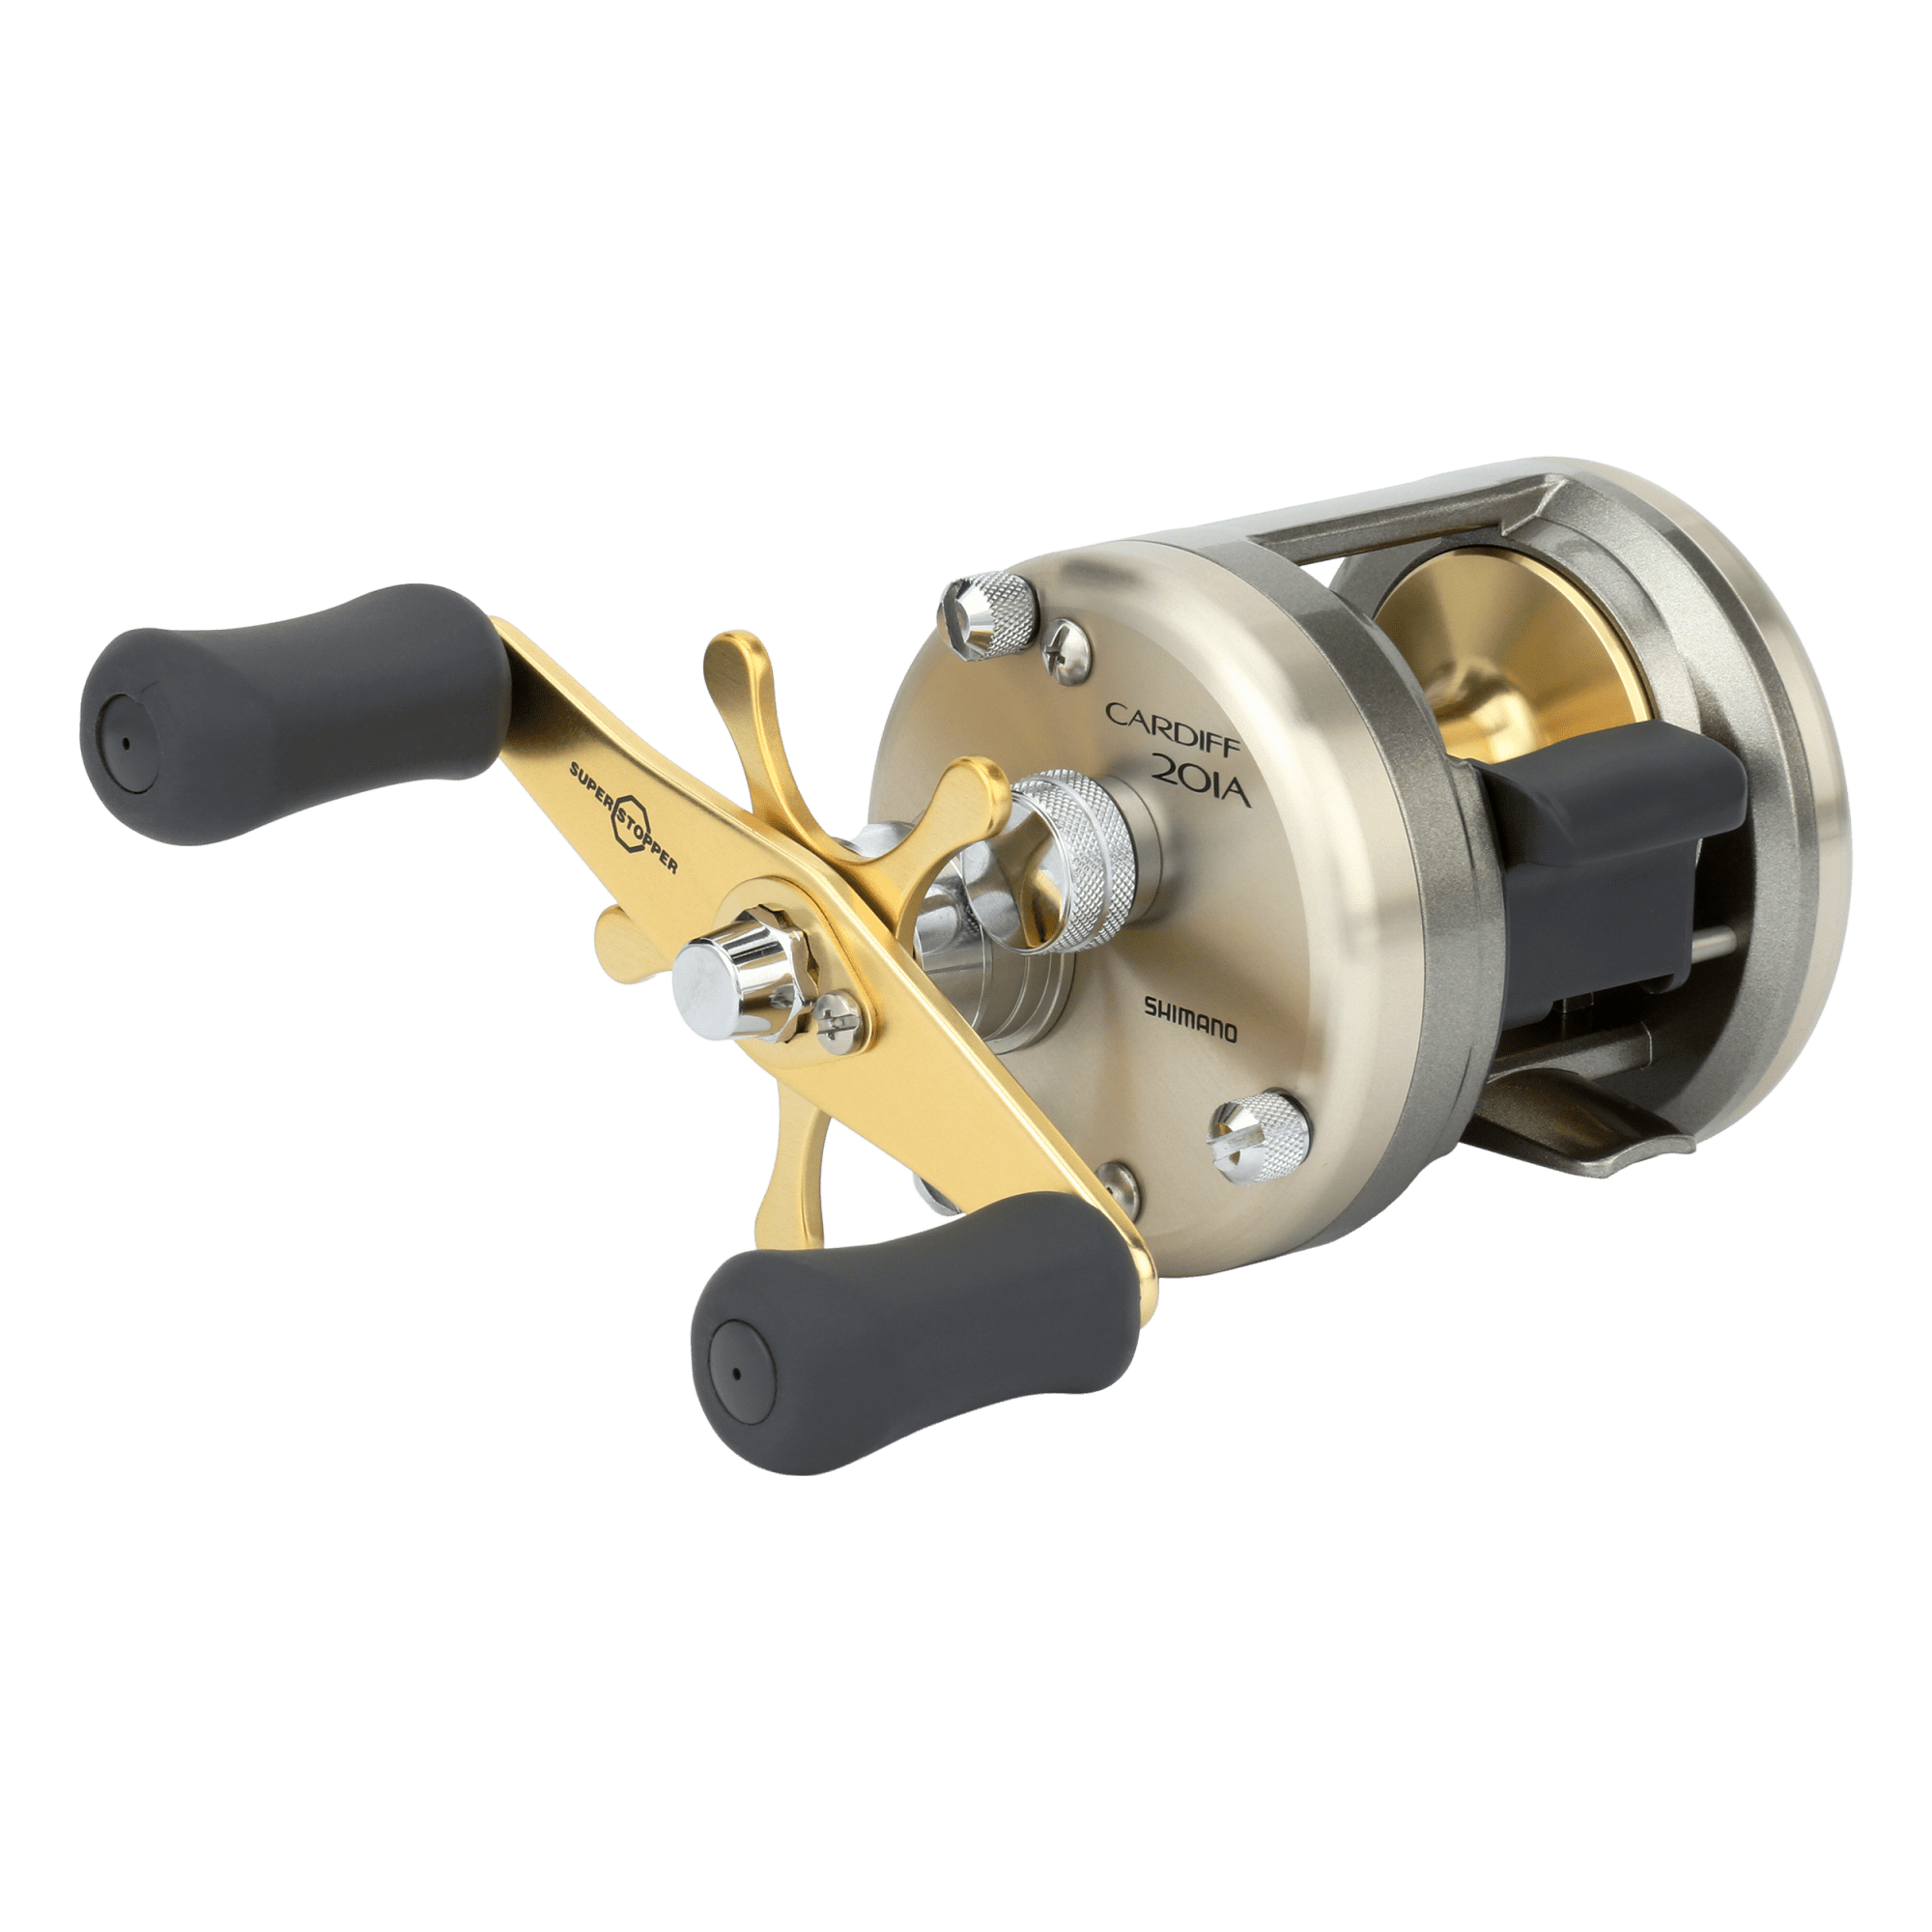 Shimano Fishing CARDIFF 400A Round Reels [CDF400A